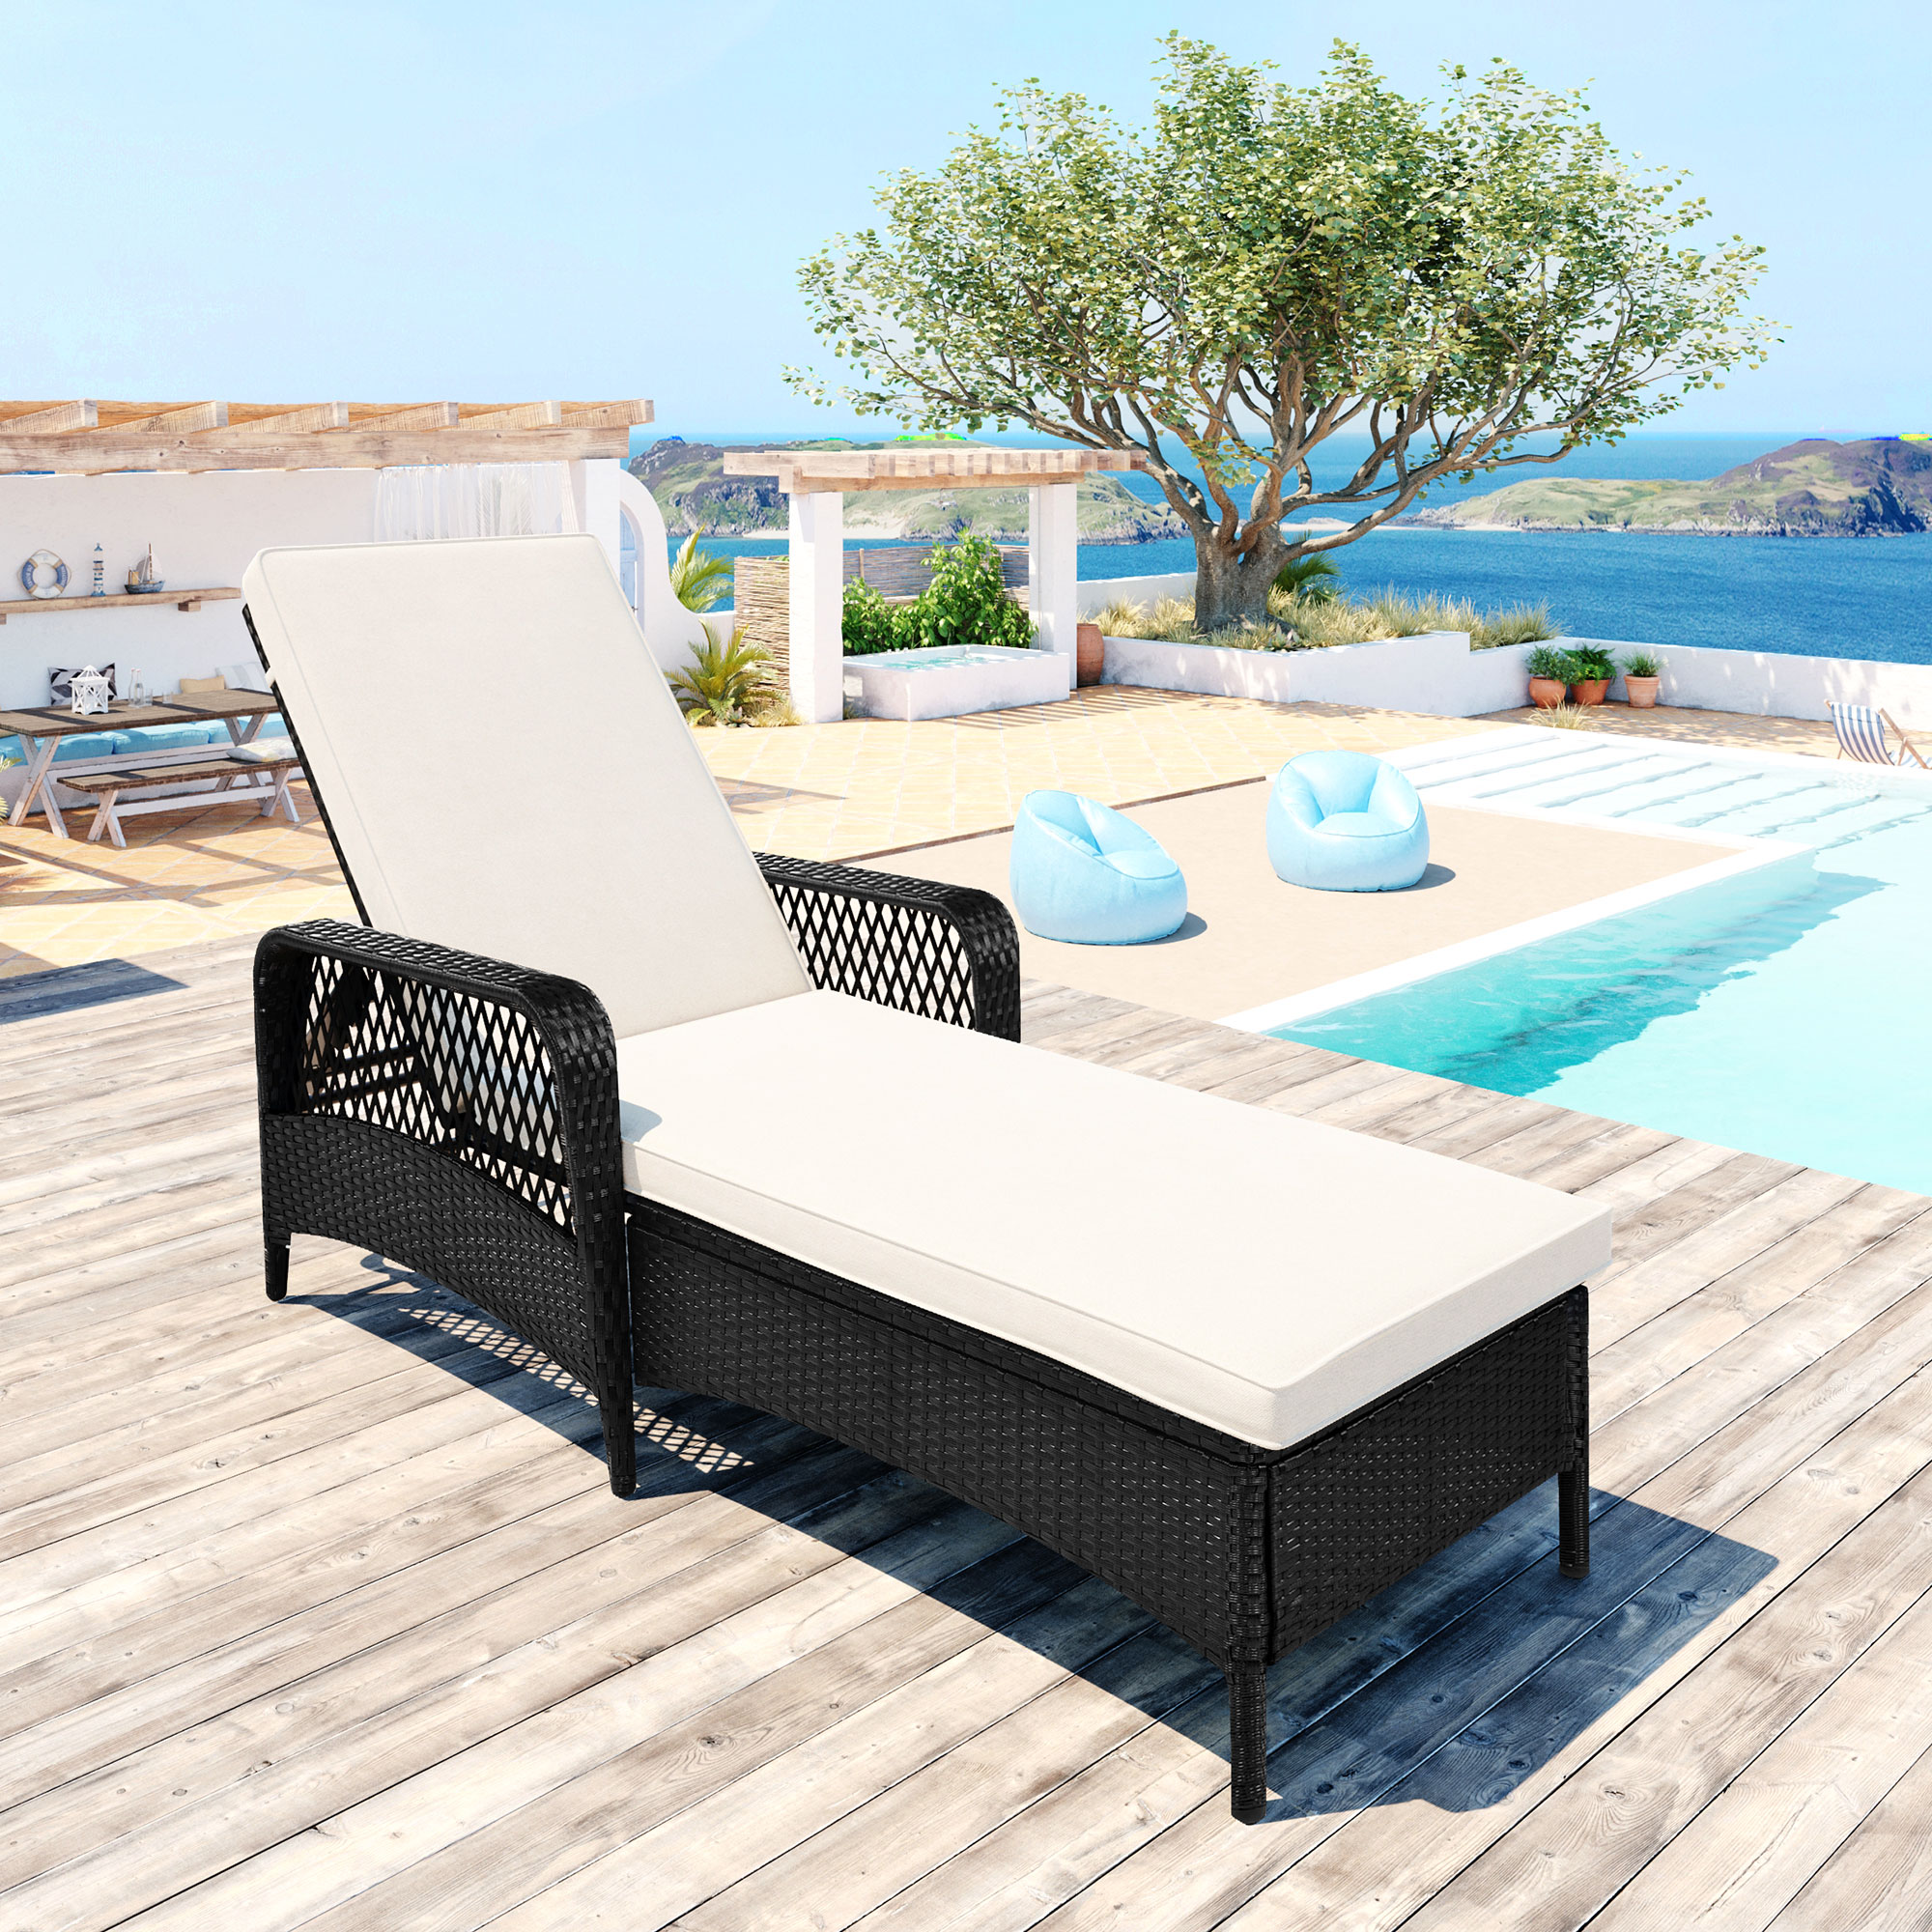 Patio Chaise Lounge Chair, Rattan Wicker Chaise Lounge, All-Weather Sun Chaise Lounge Furniture, Pool Furniture Sunbed with Removable Cushion, Tanning Lounge Chair with 5 Adjustable Positions, B336 - image 1 of 9